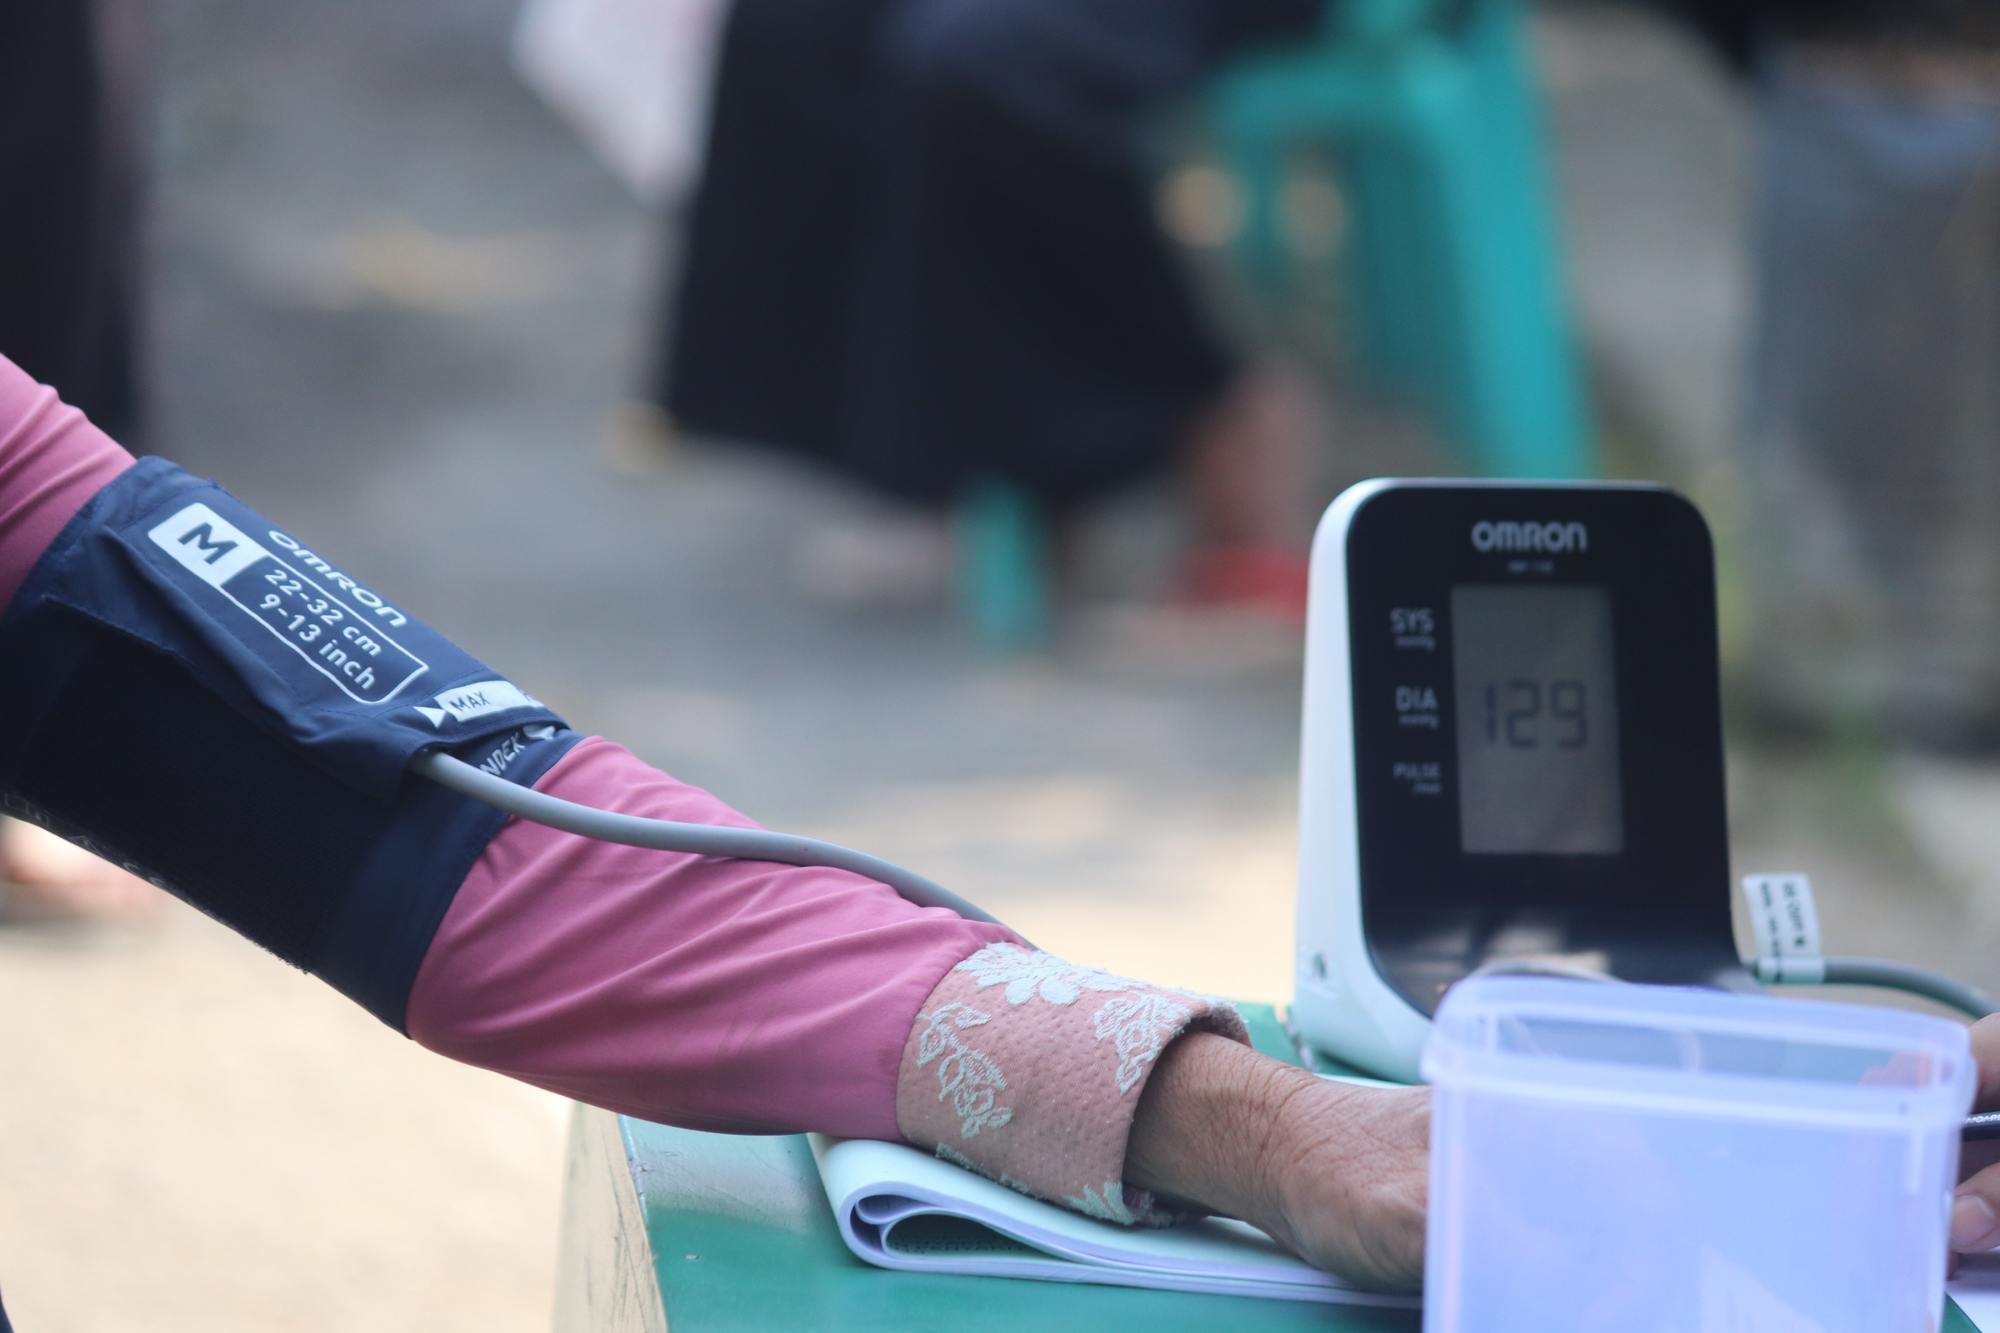 A person's arm and hand while having their blood pressure checked